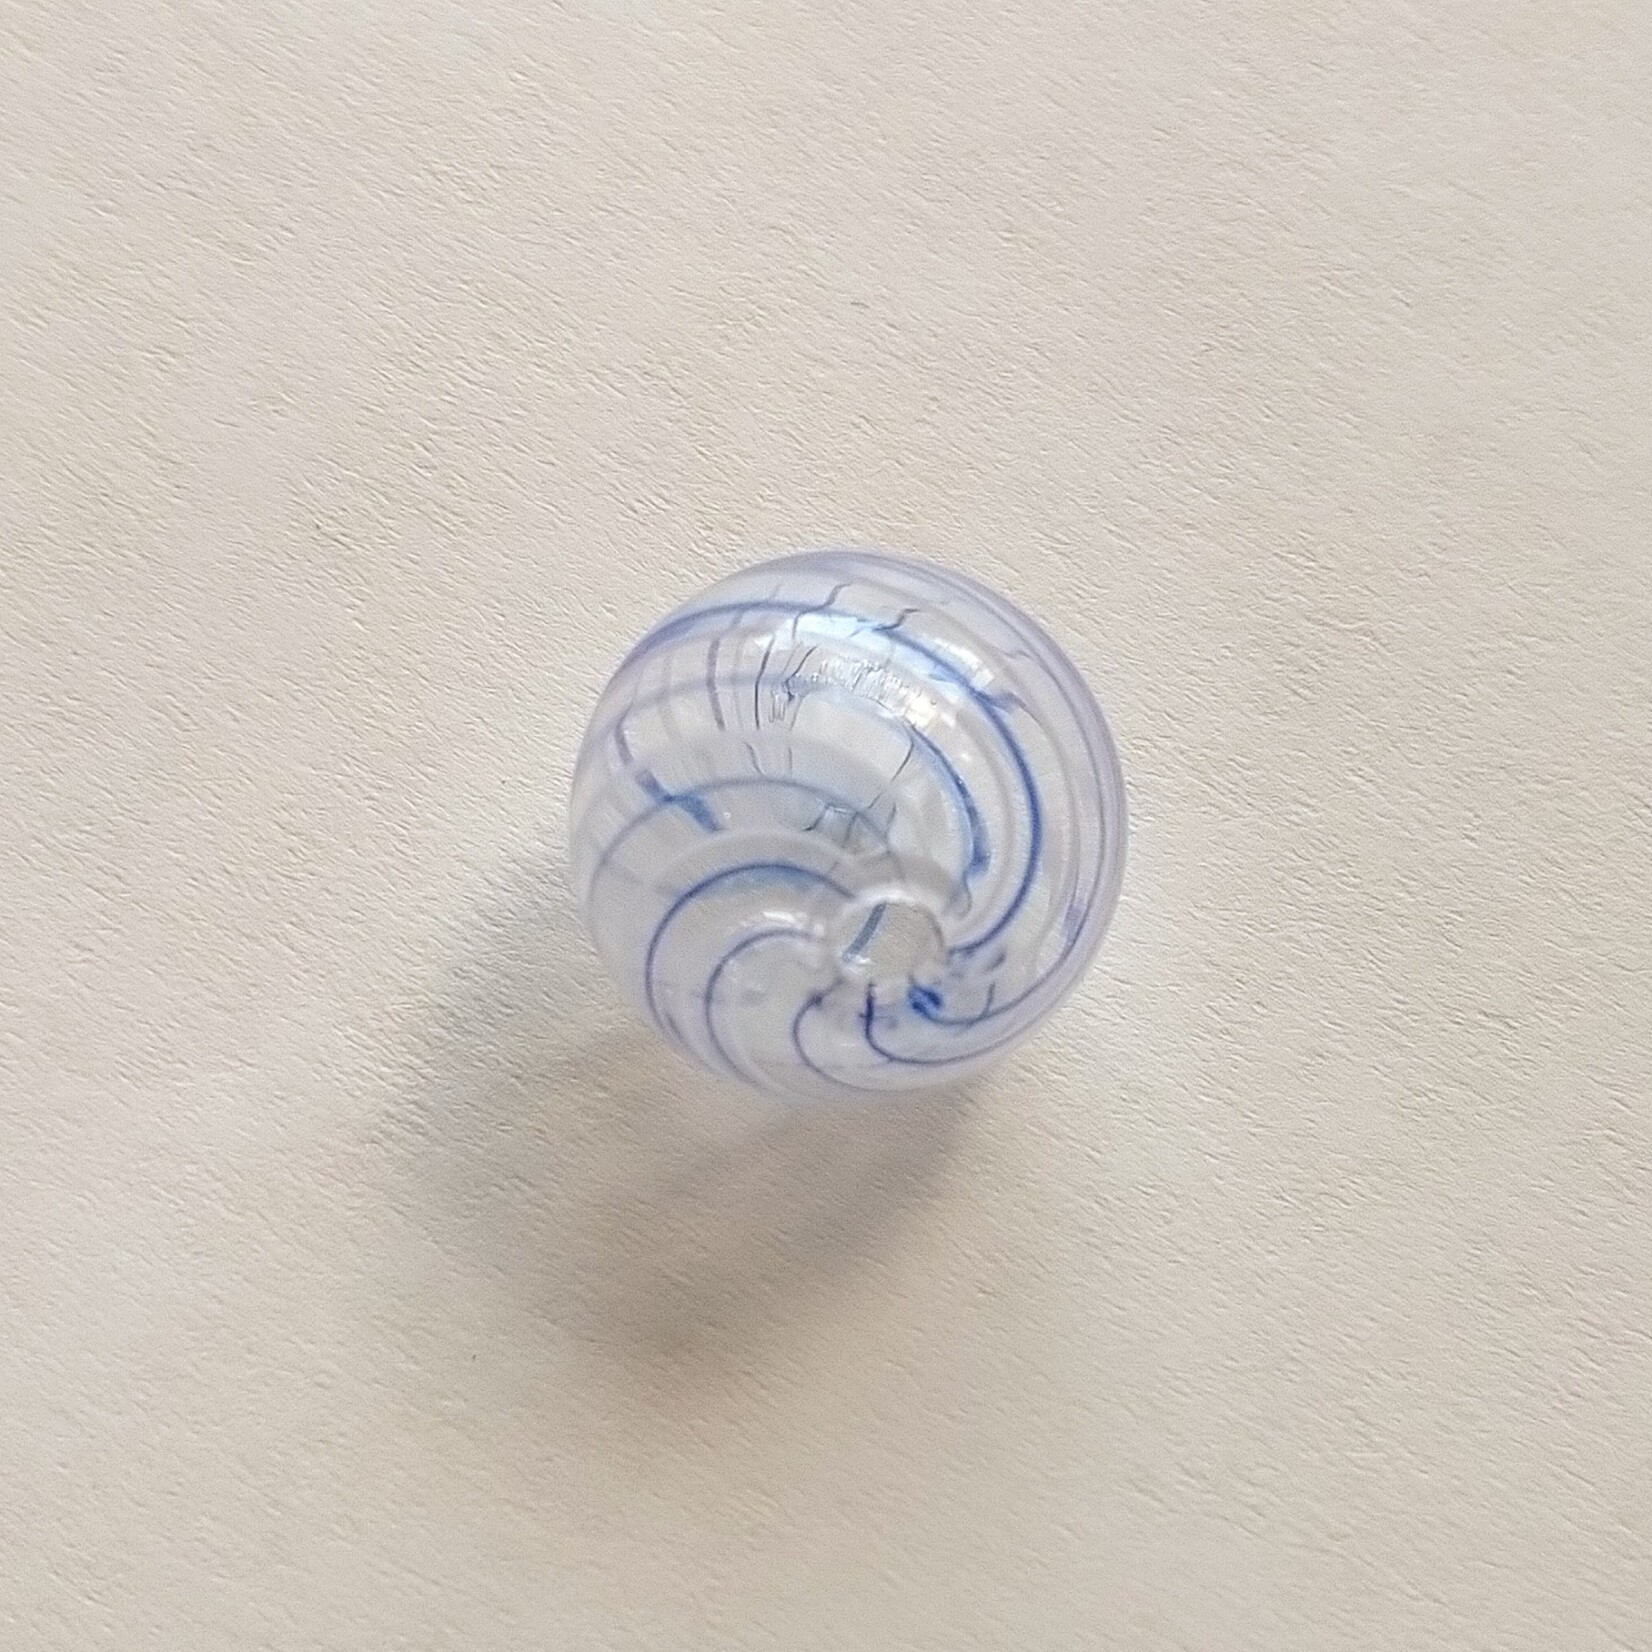 Hollow Lampwork Glass 14/16mm Clear and Blue Swirl Round Ball Bead